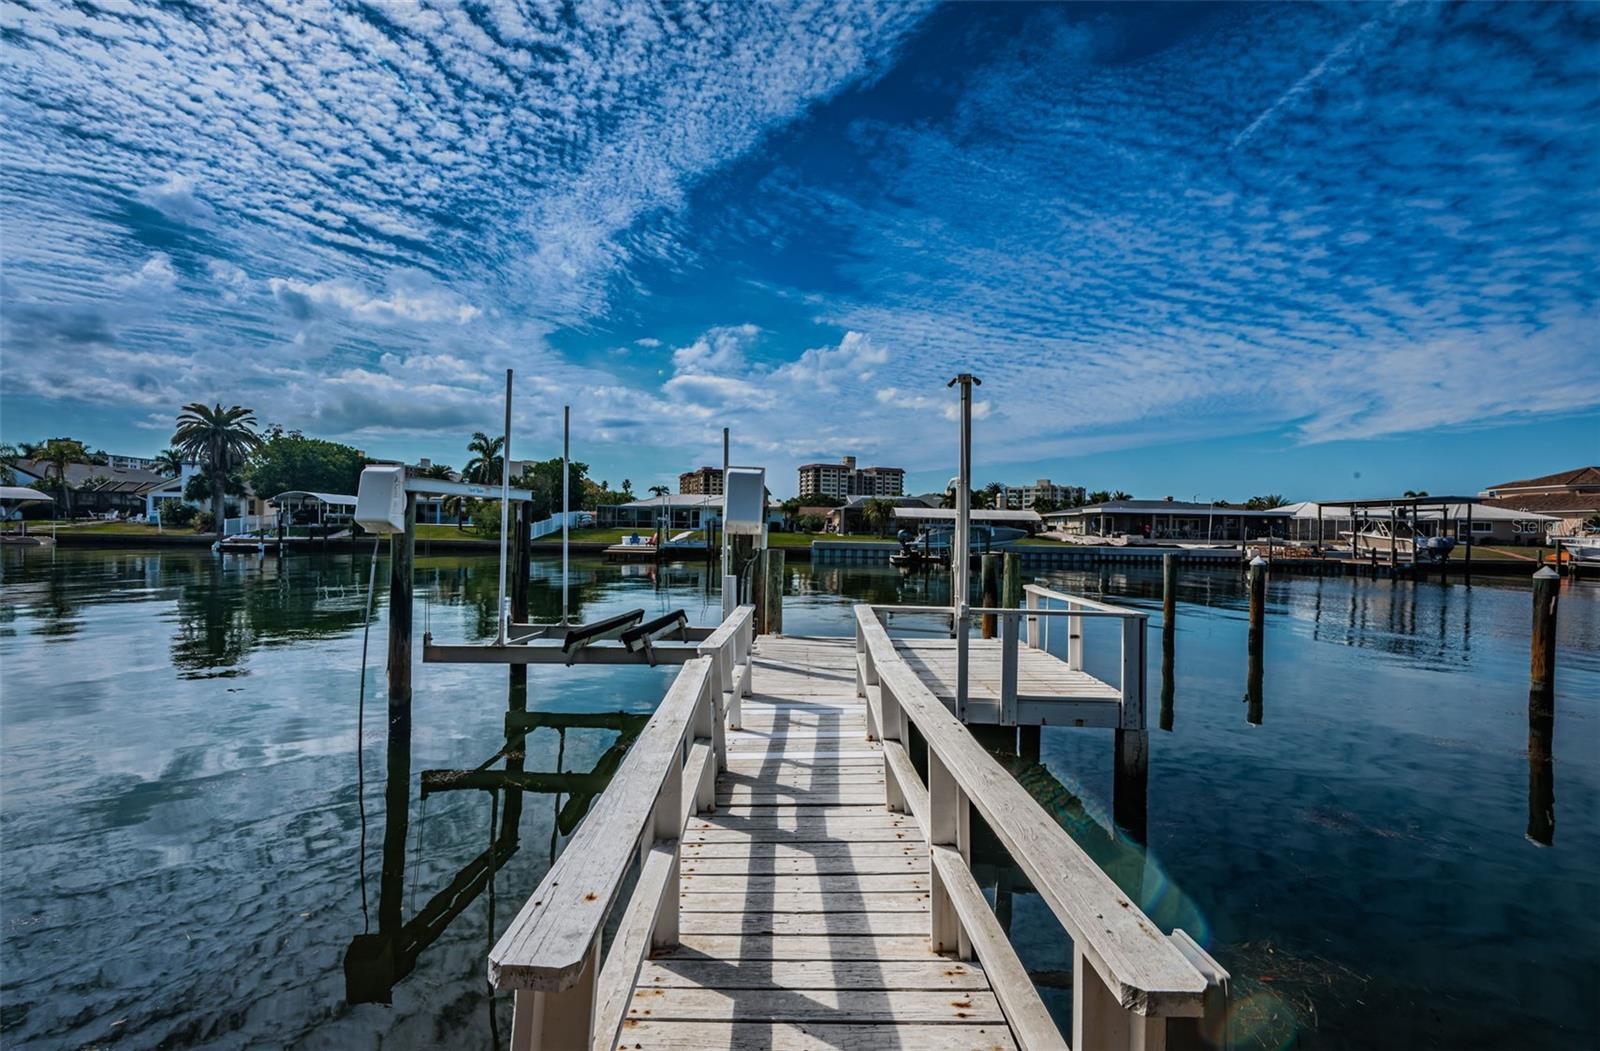 With its direct connection to the waterfront, this dock is not just a feature; it's an invitation to embrace the beauty of waterfront living.